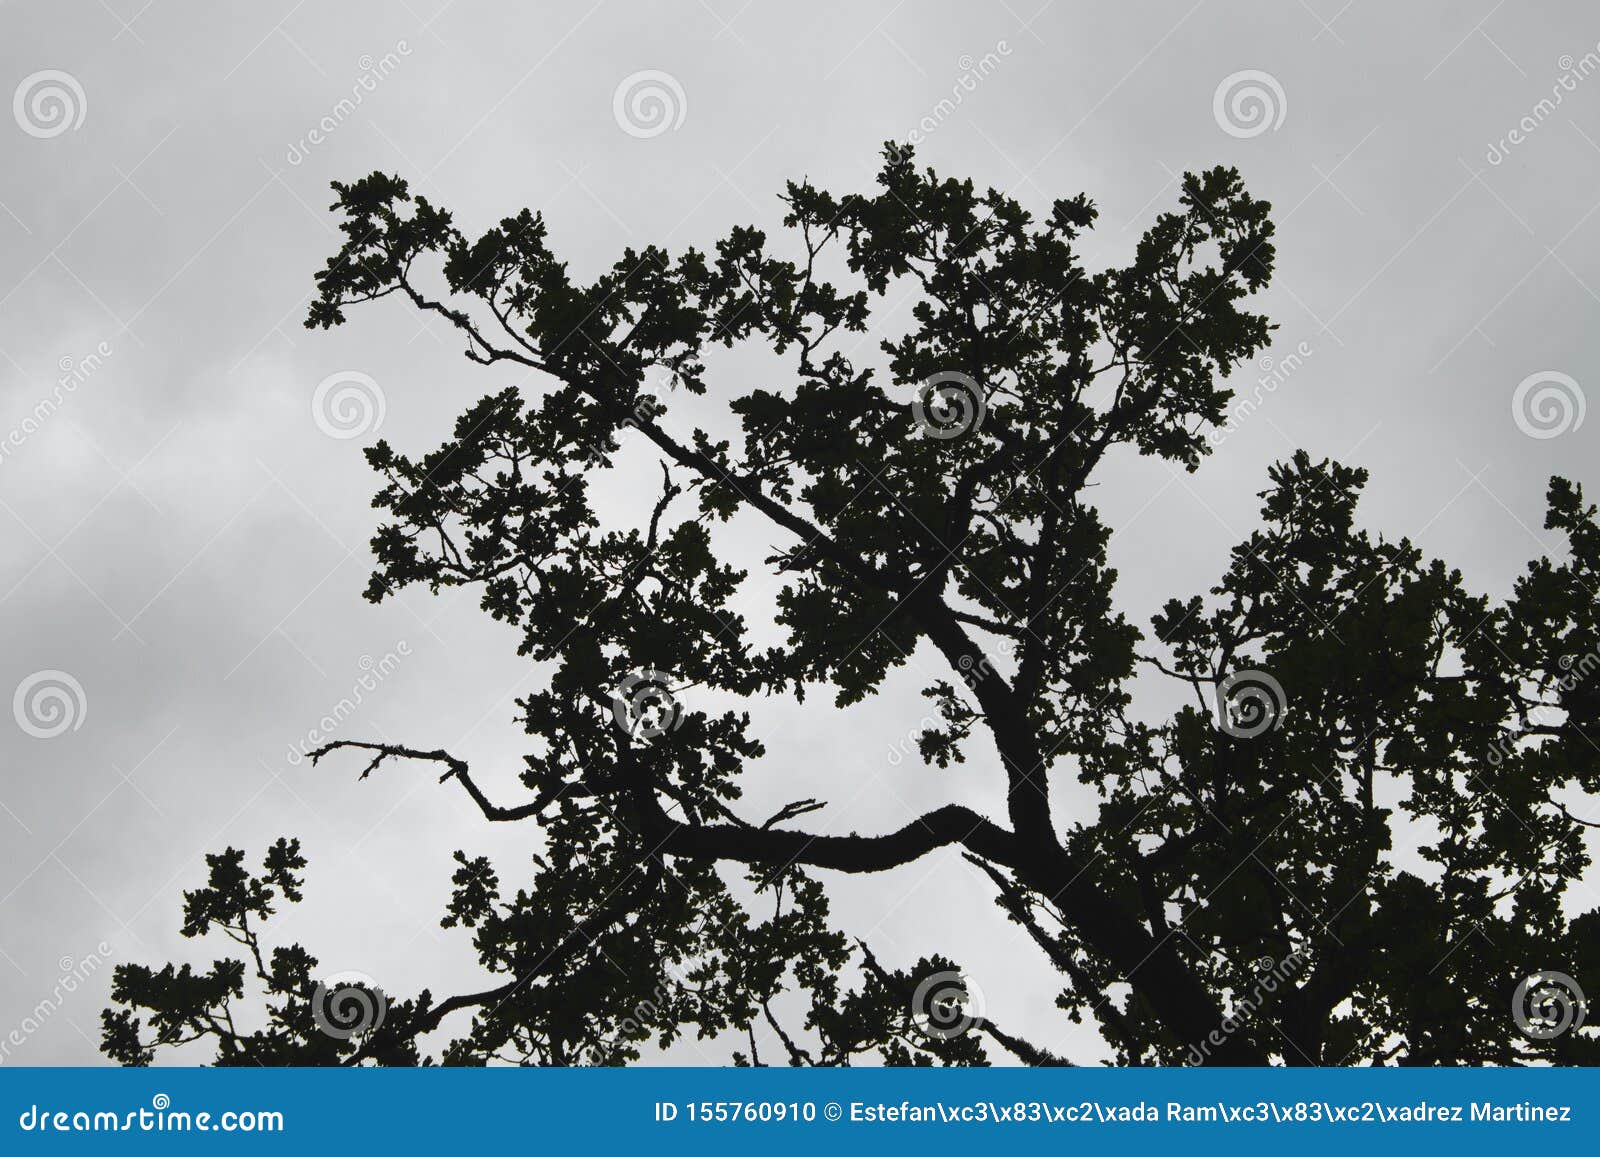 photography of branches and leaves of a tree in a forest